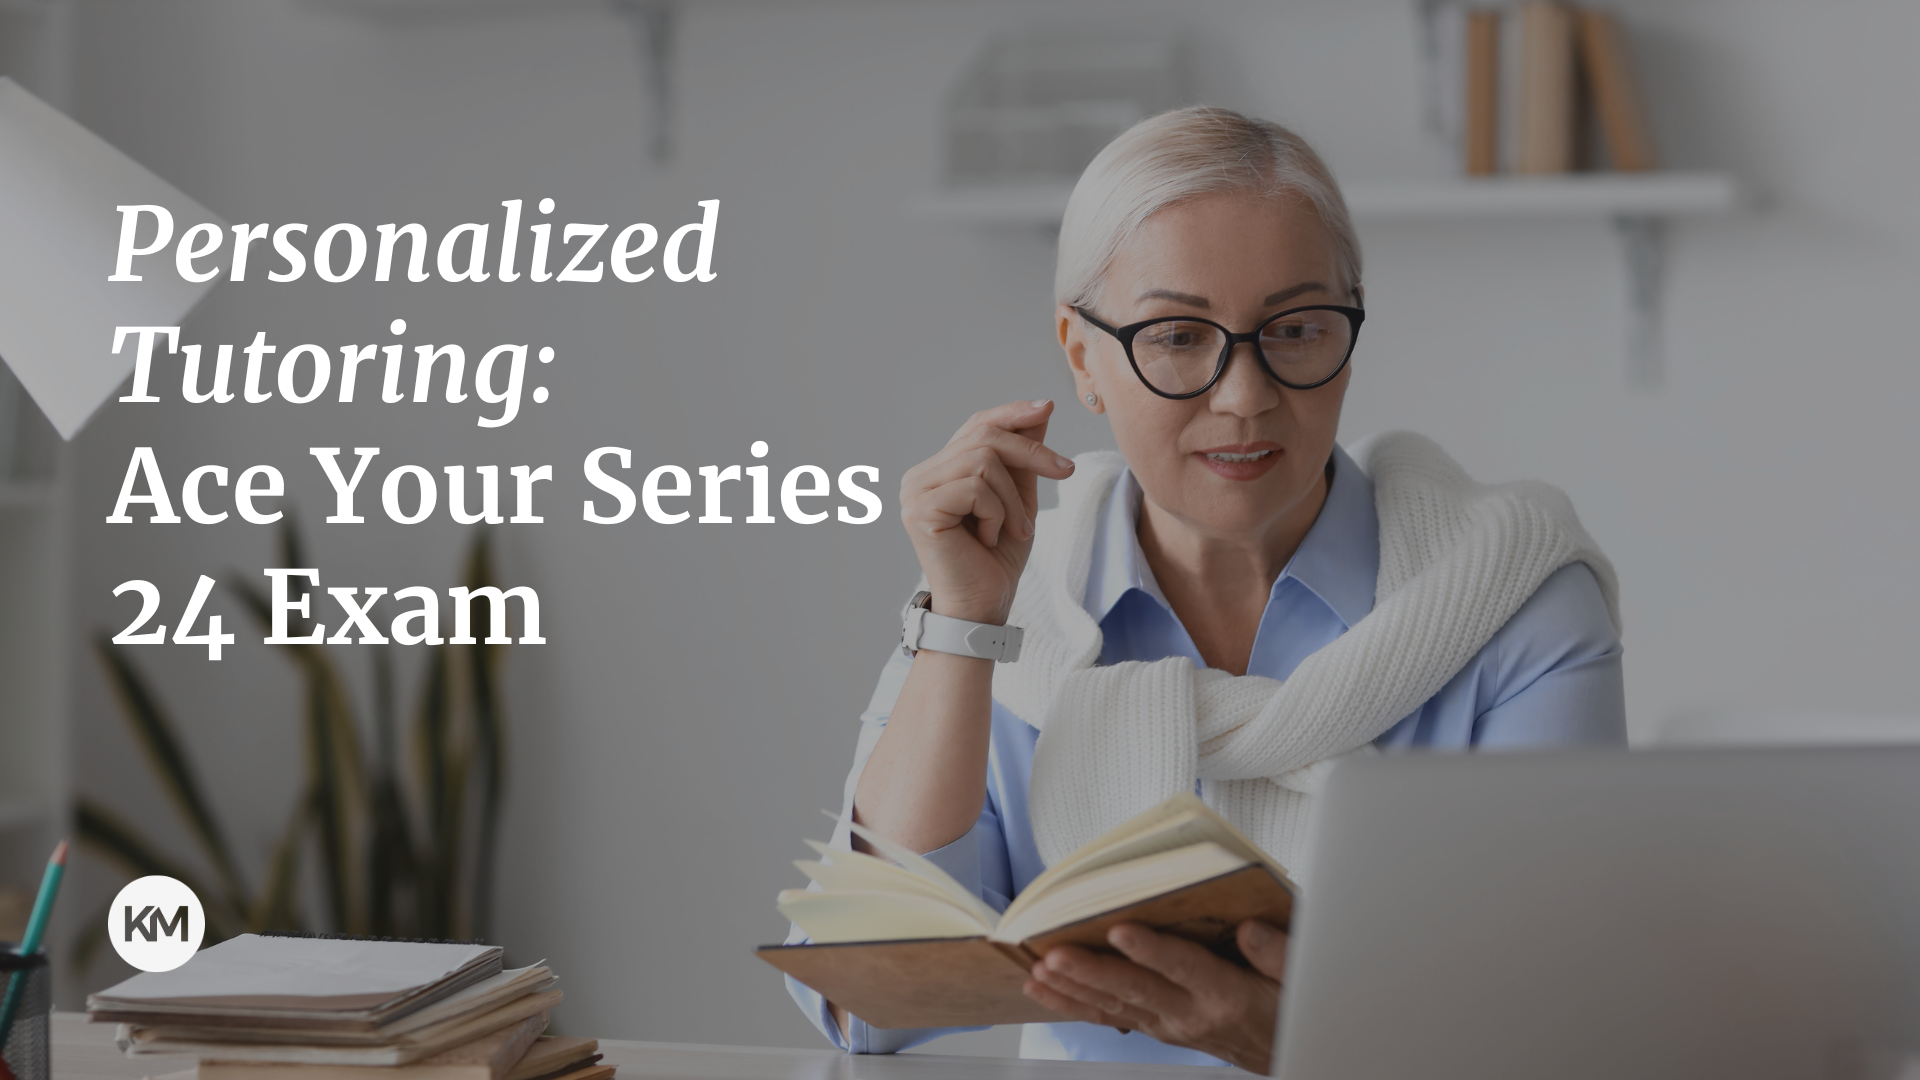 Ace Your Series 24 Exam With Personalized Tutoring